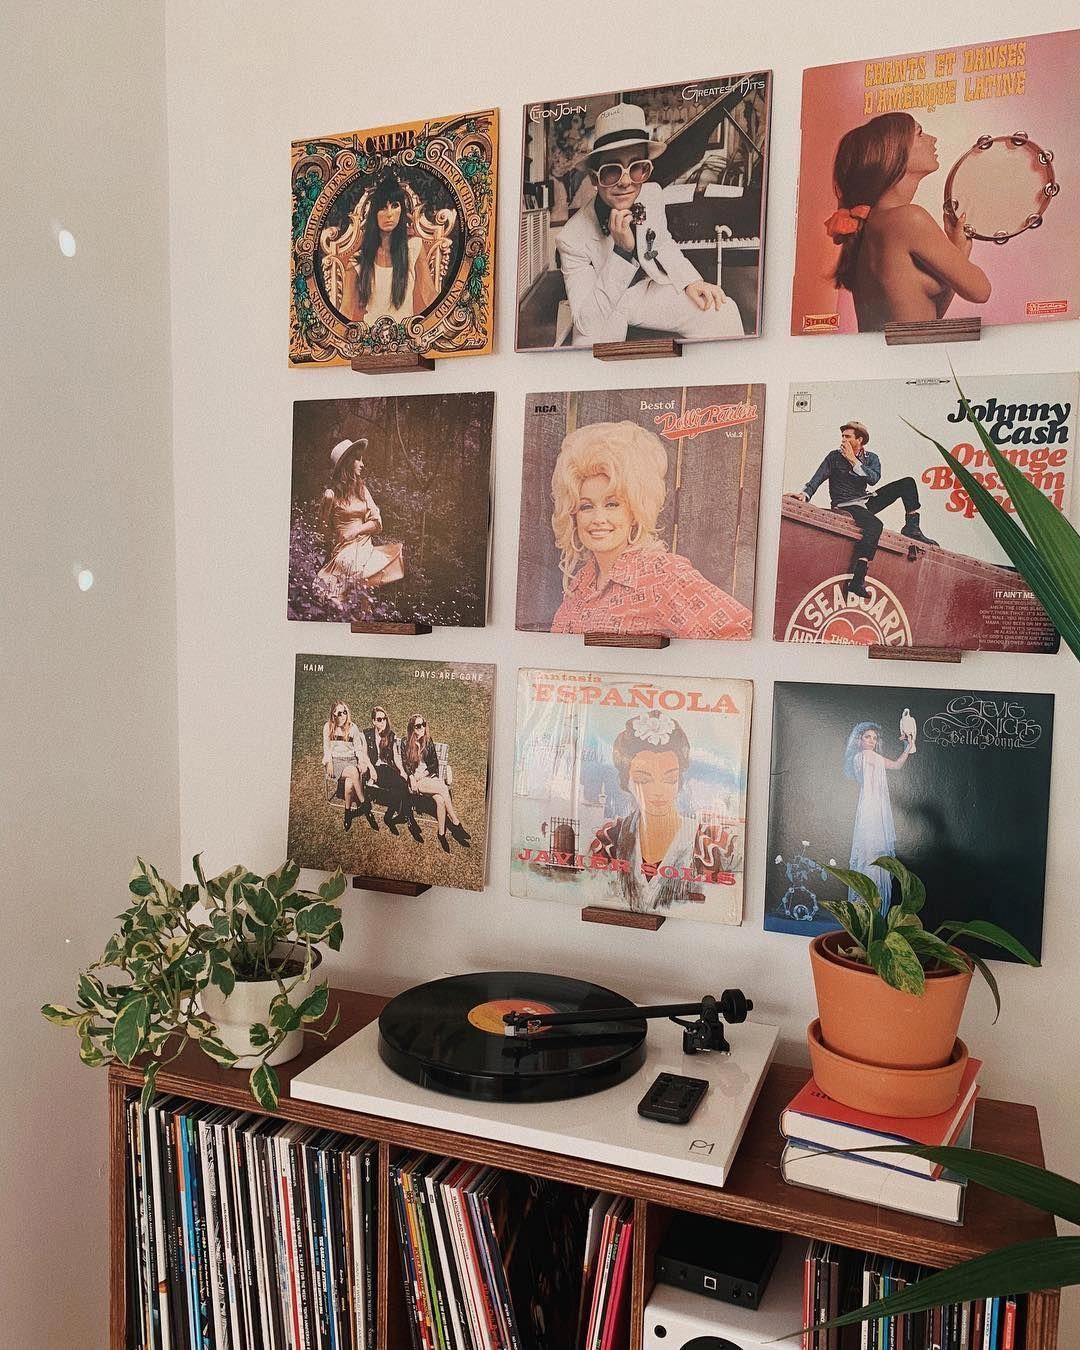 Vinyl Wall Decor: A Touch Of Homely Charm